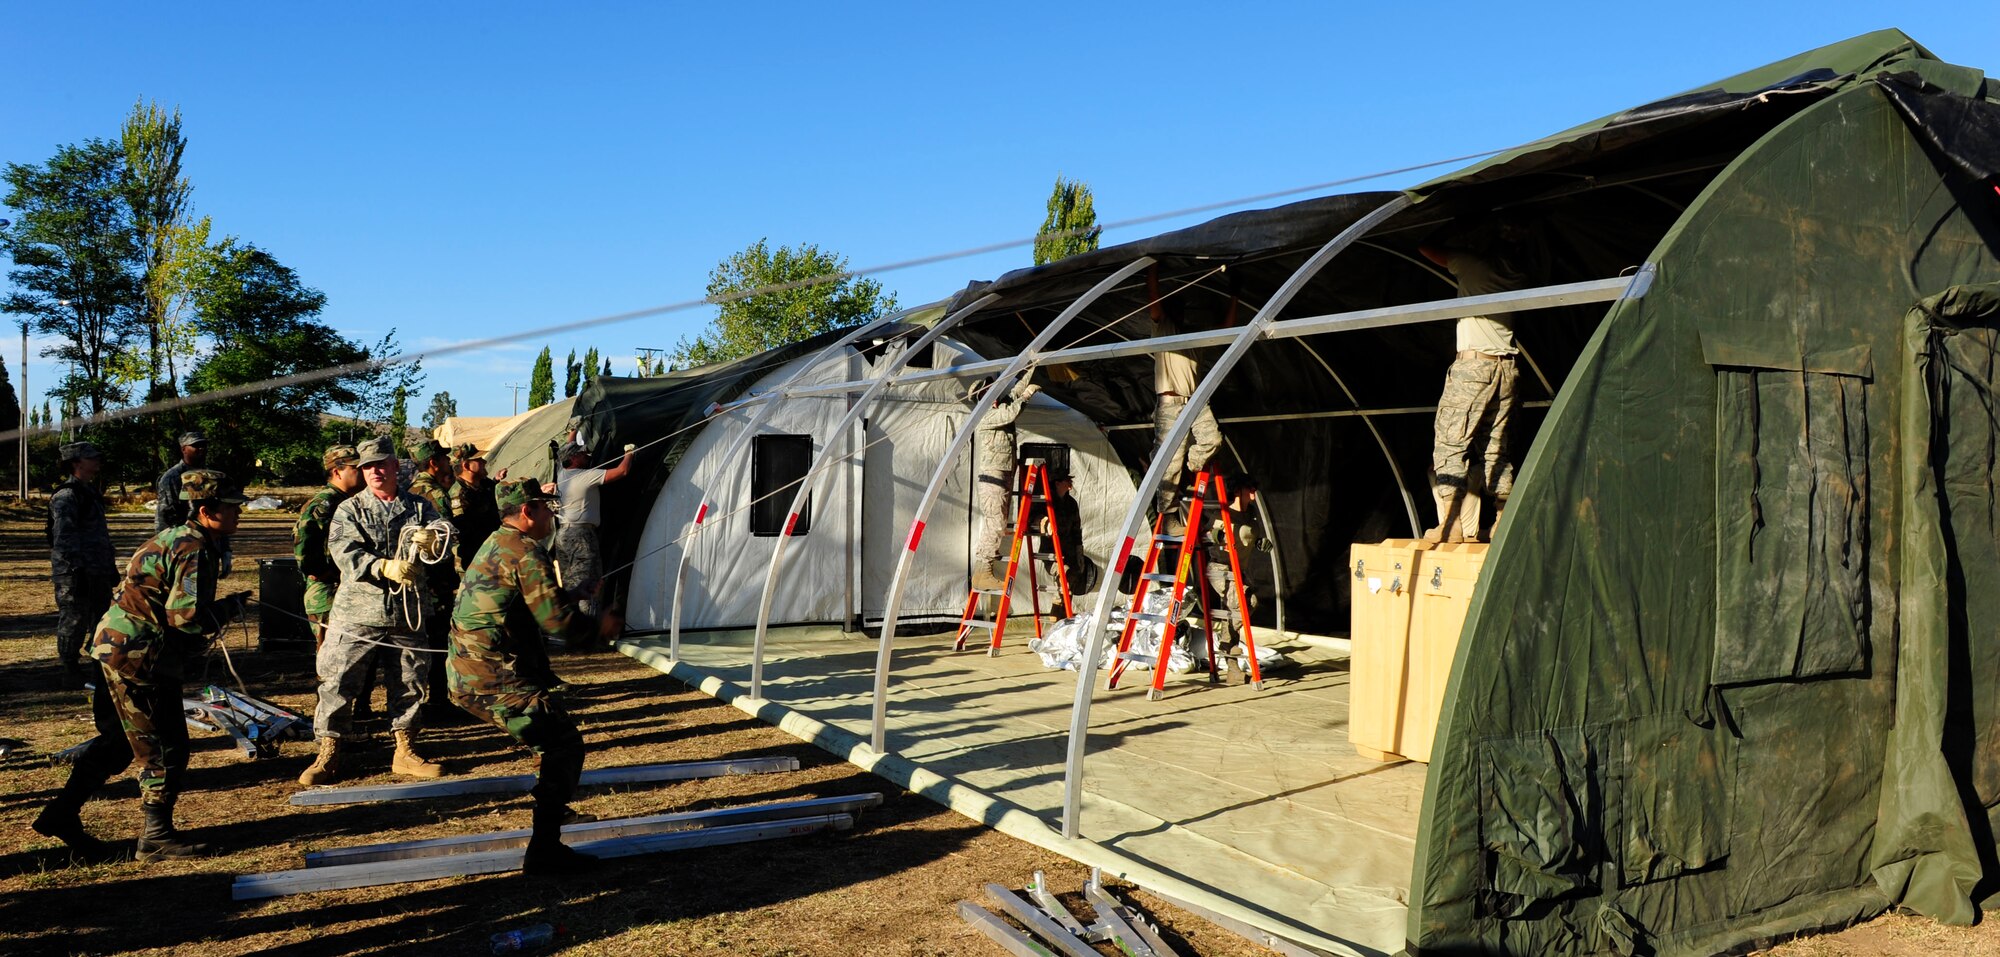 Airmen from an Air Force Expeditionary Medical Support team along with members of the Chilean army pull the roof over a mobile hospital March 12, in Angol, Chile. The EMEDS team is adding an additional operating room and three patient wards to the facility at the request of local Chilean medical officials. (U.S. Air Force photo/Senior Airman Tiffany Trojca)

